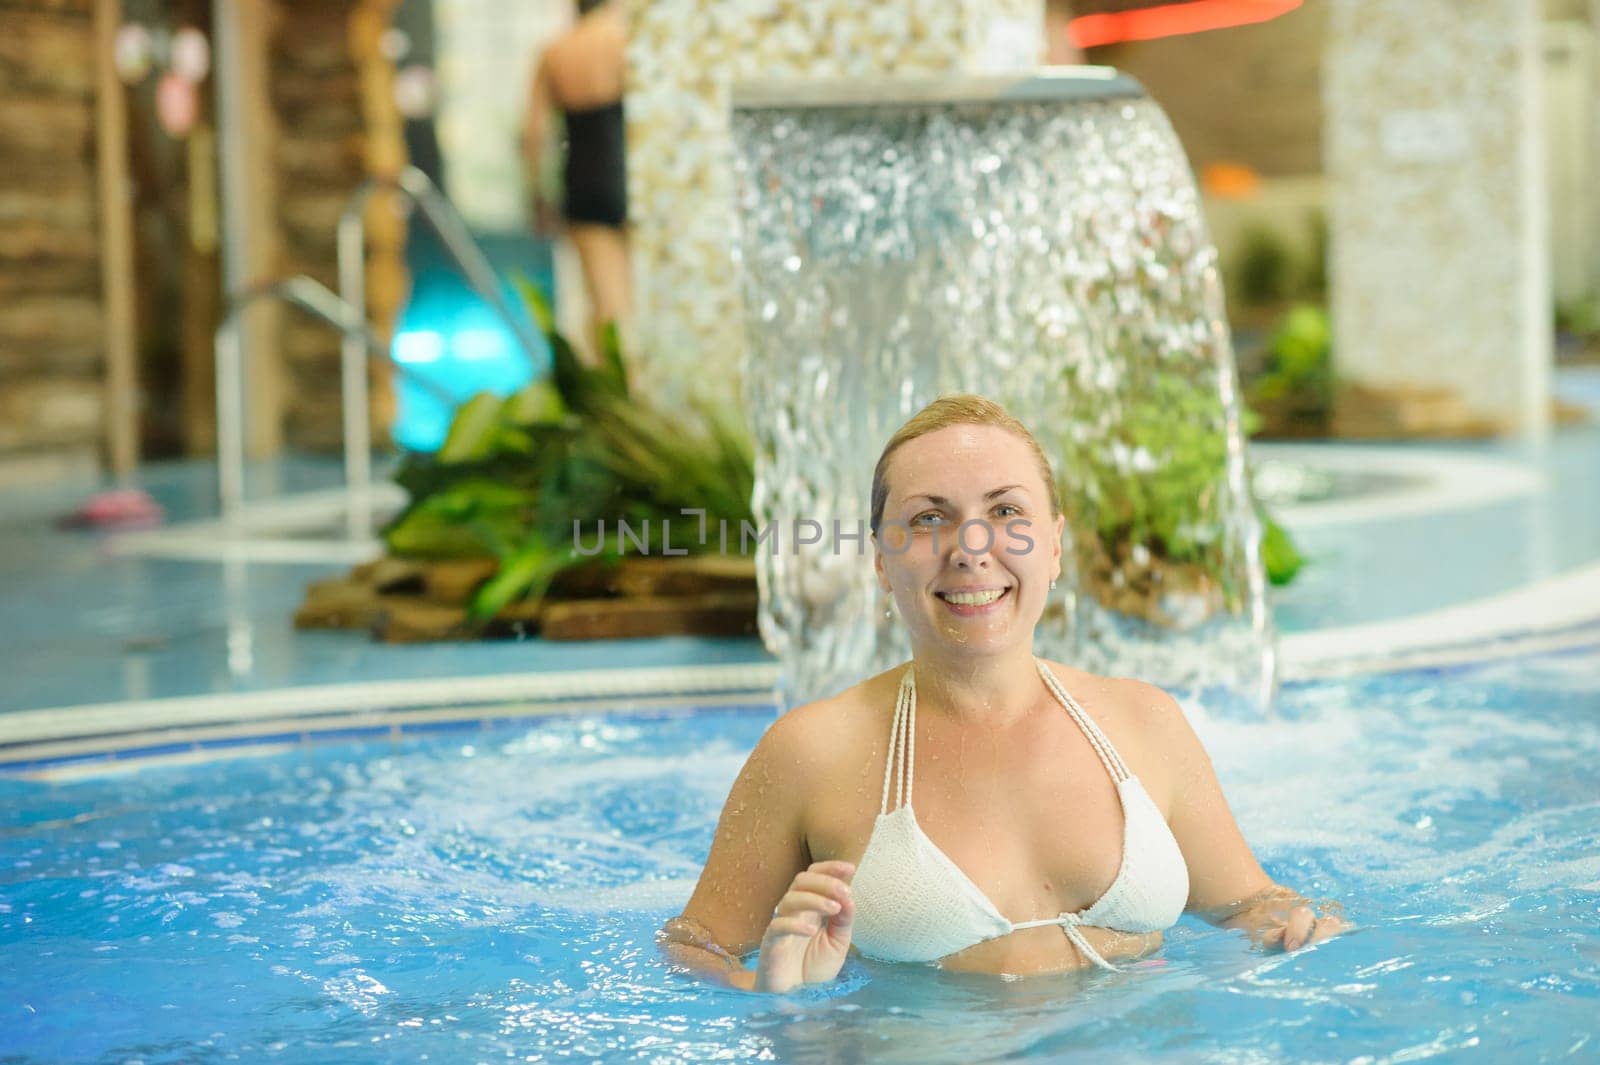 Woman enjoying the spray of the waterfall and relaxing in the pool.